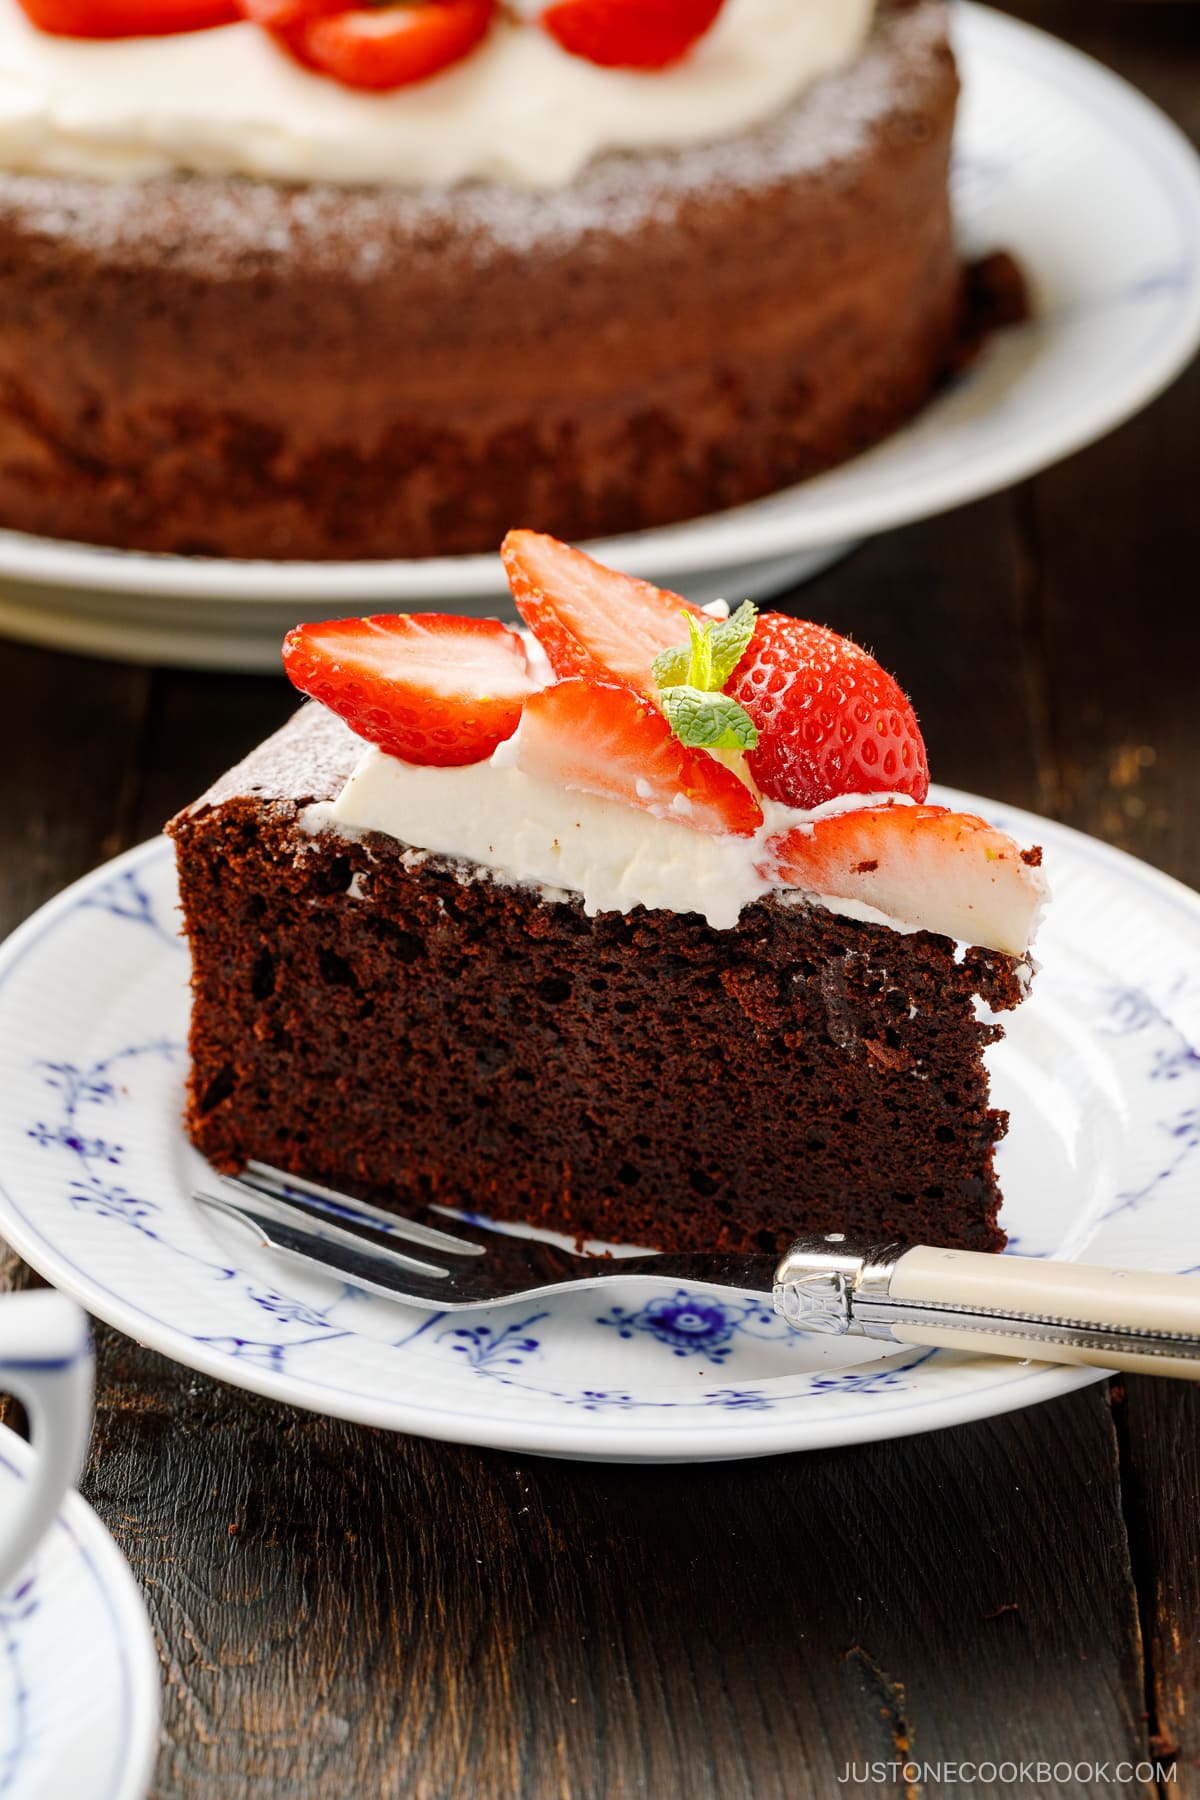 A plate containing a slice of Chocolate Gateau (Chocolate Cake), topped with whipped cream and strawberry slices.